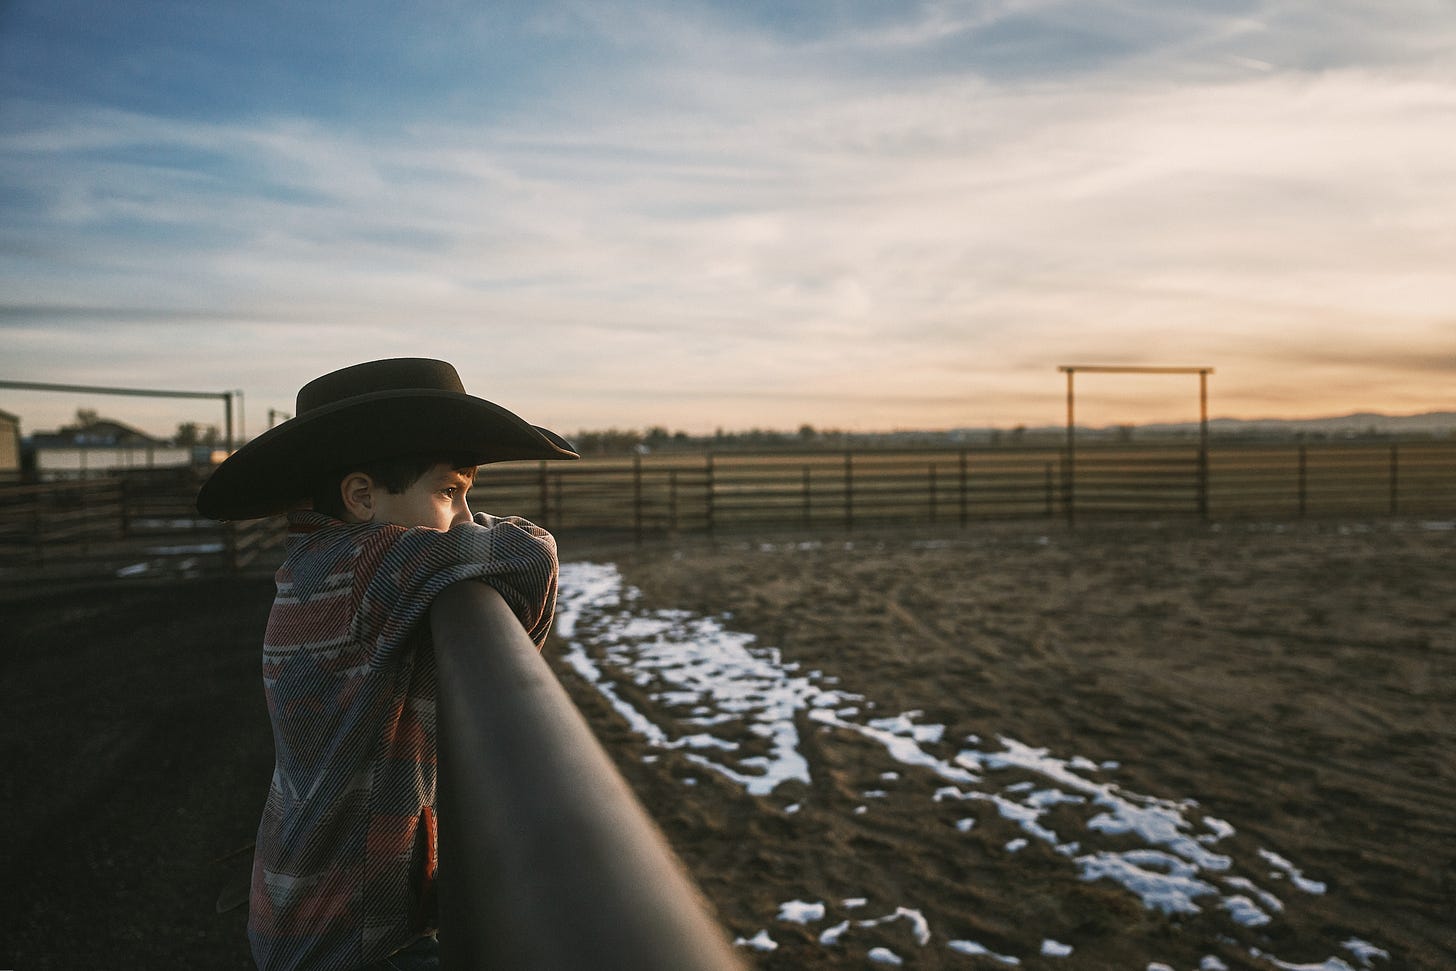 A boy in a cowboy hat overlooks a horse riding arena at sunset